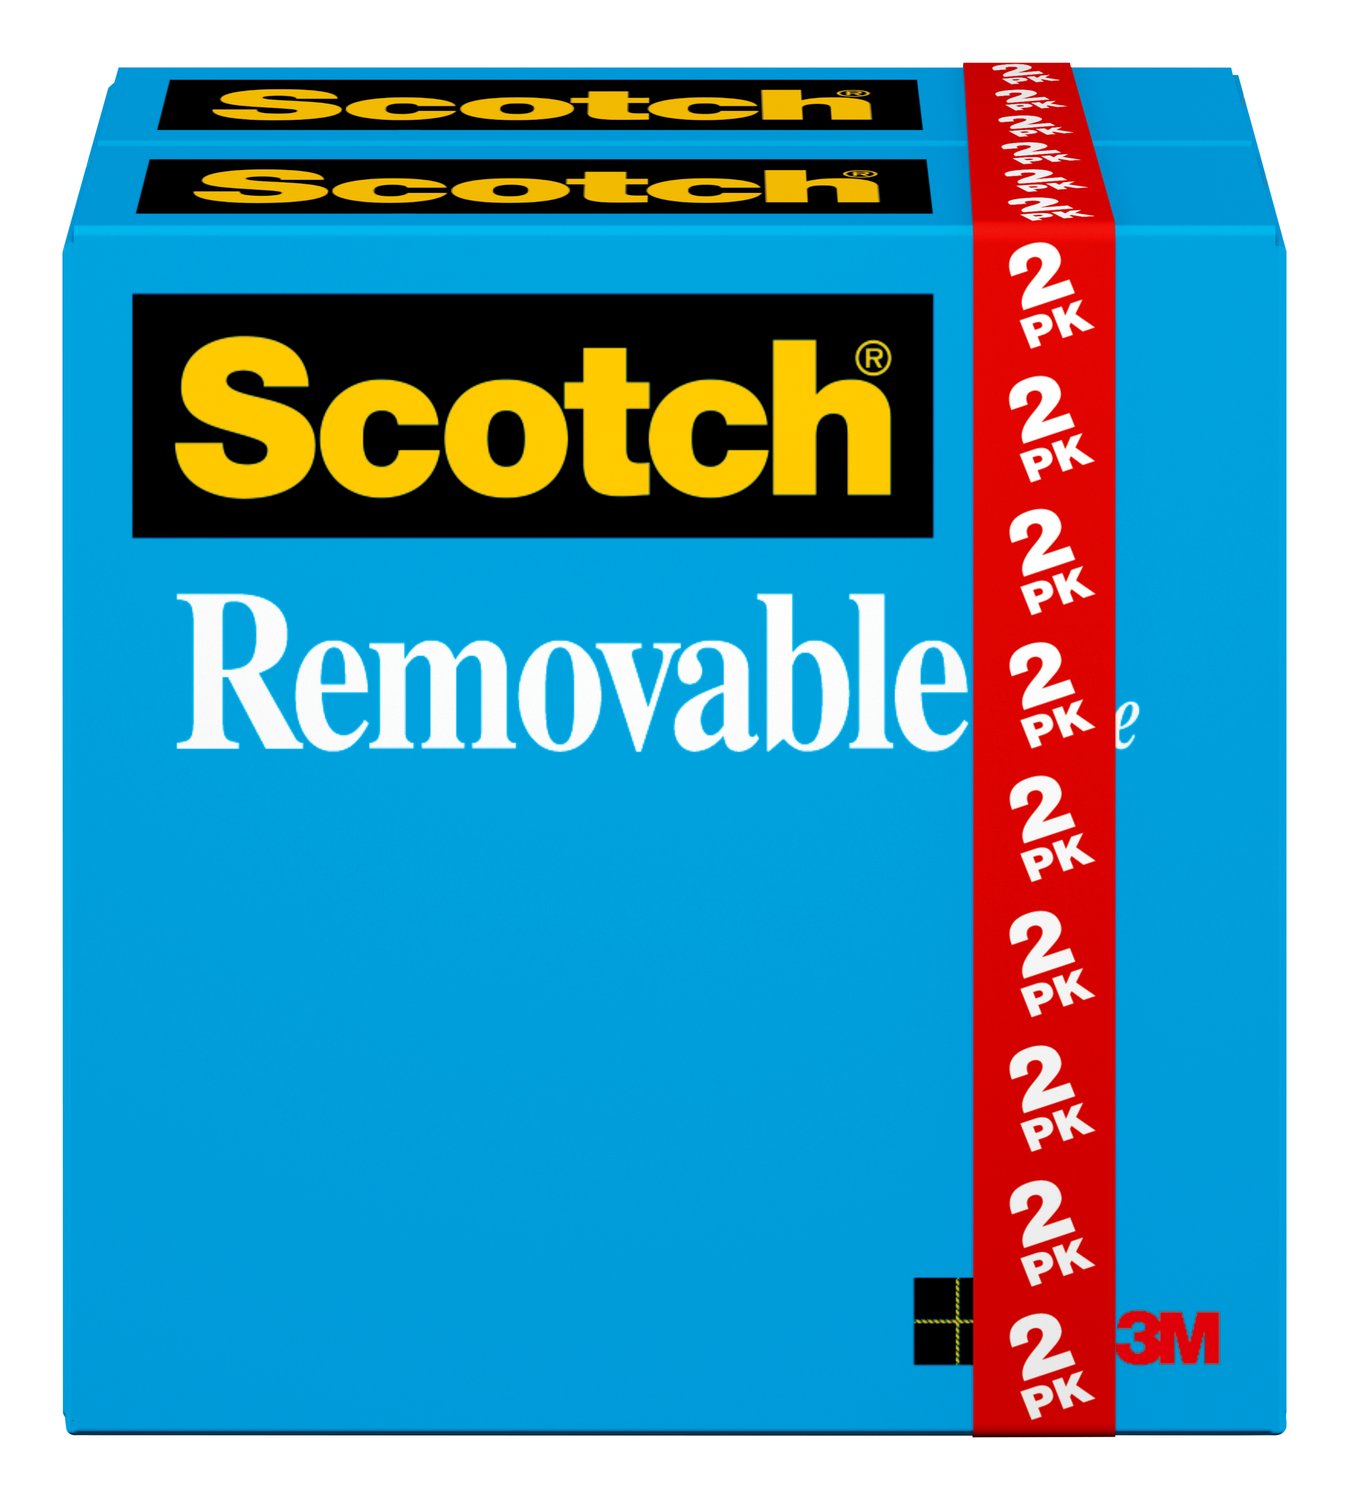 7010370047 - Scotch Removable Tape 811-2PK, 3/4 in x 1296 in (19 mm x 32,9 m) 2-Pack